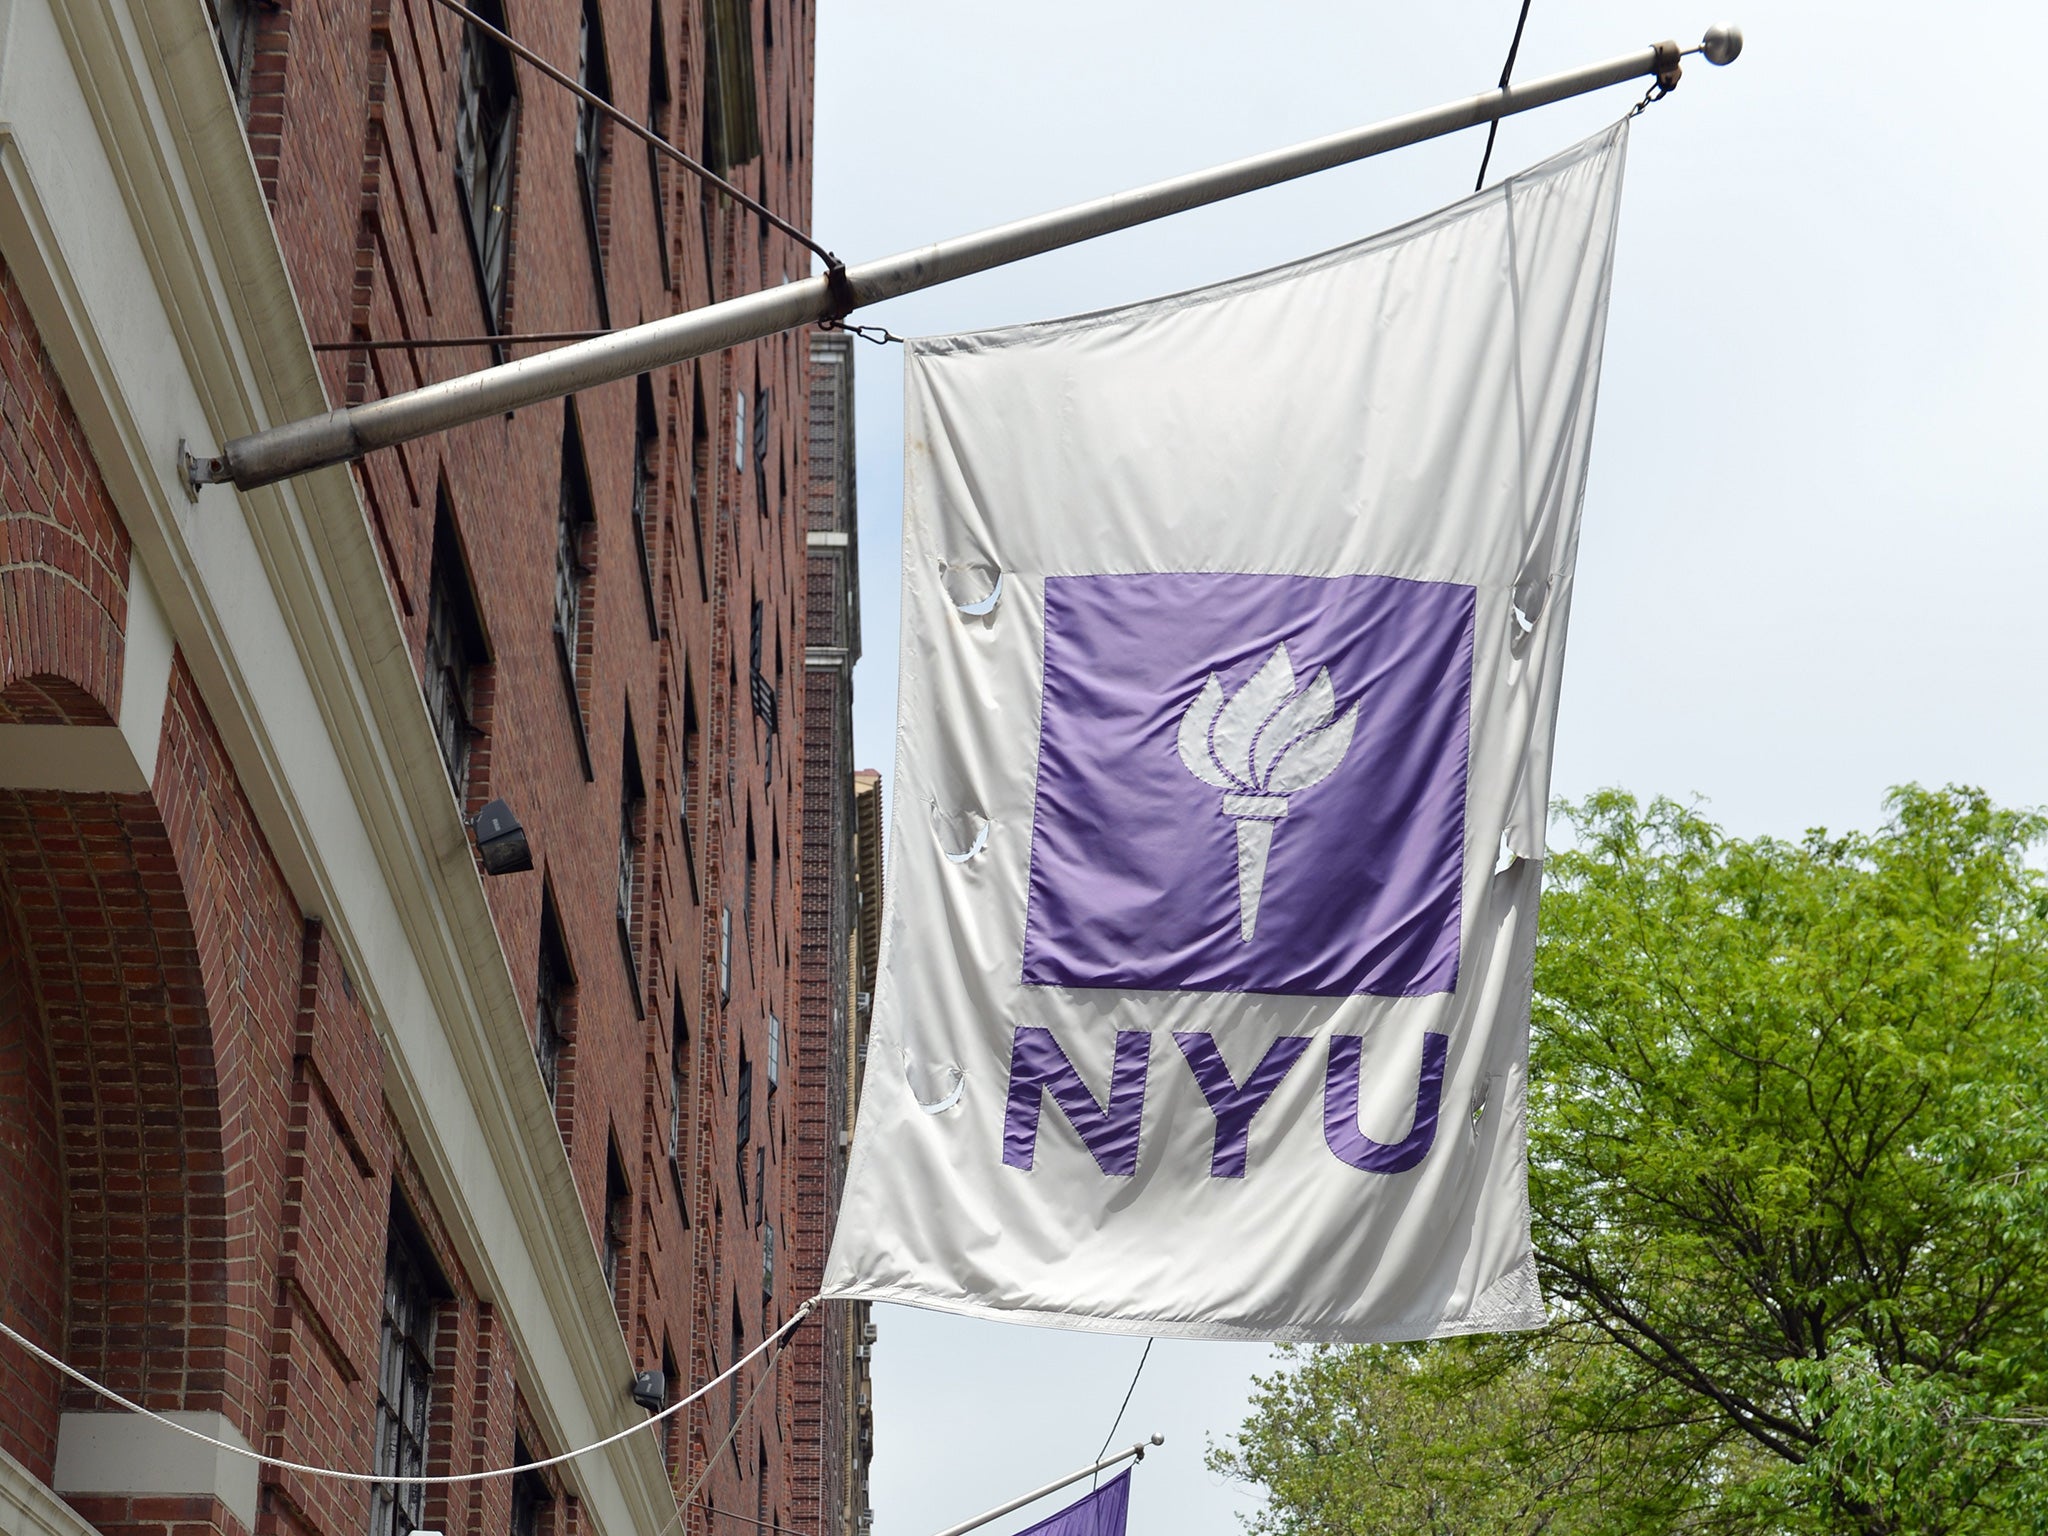 Despite the groups Facebook presence, the NYU group is reportedly a fake